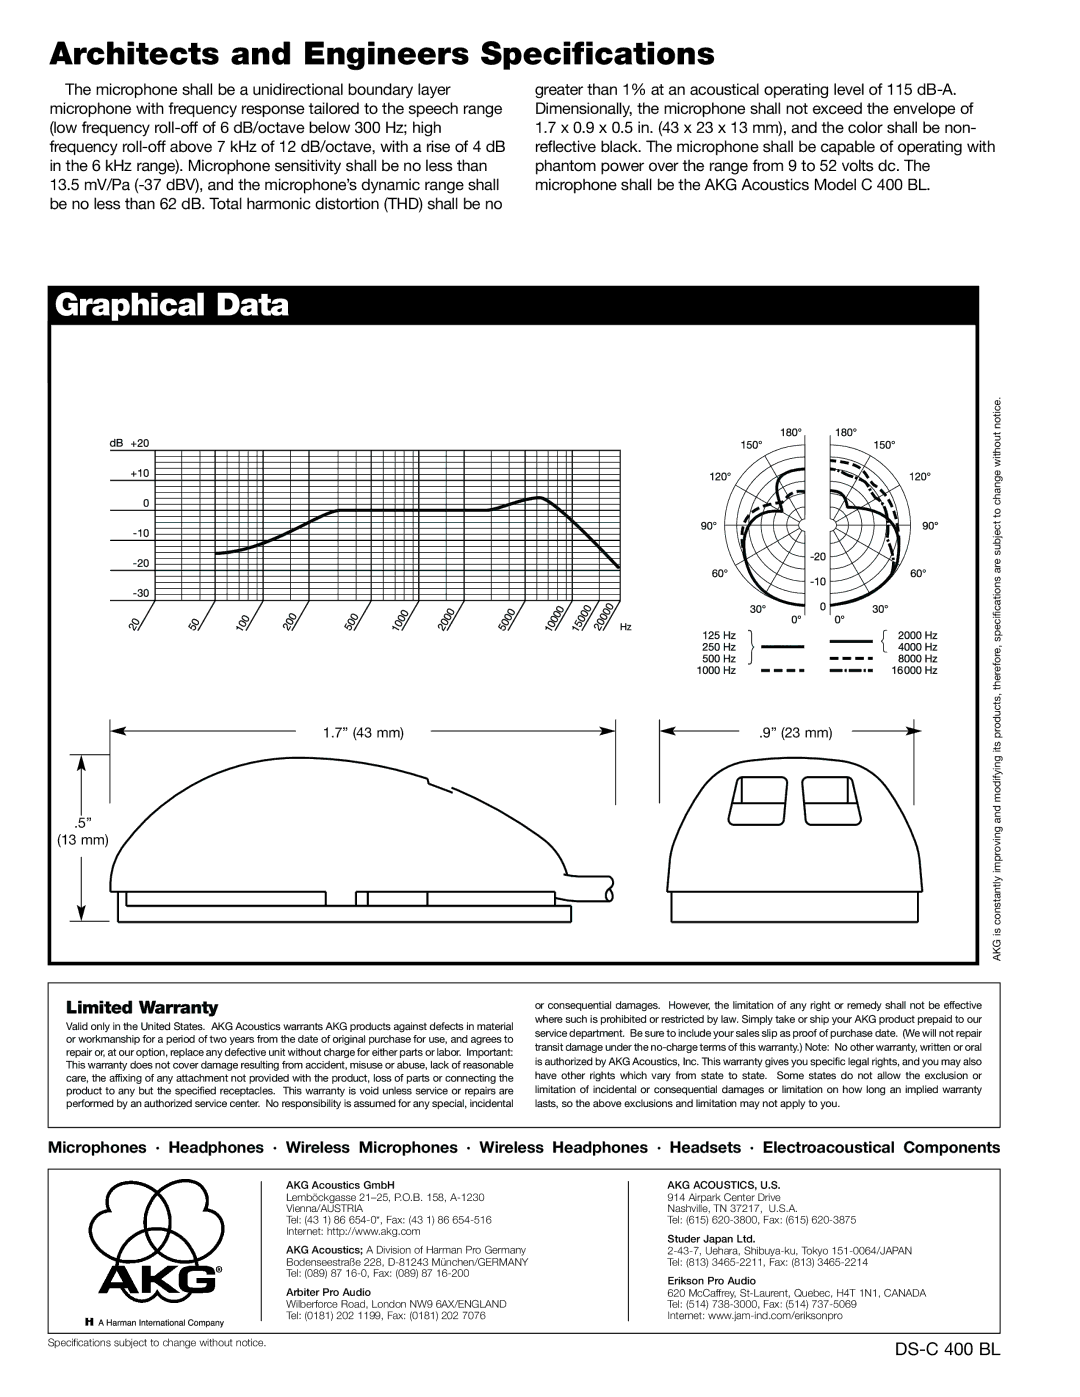 AKG Acoustics C400BL Architects and Engineers Specifications, Graphical Data, Limited Warranty, 43 mm 23 mm, 13 mm 